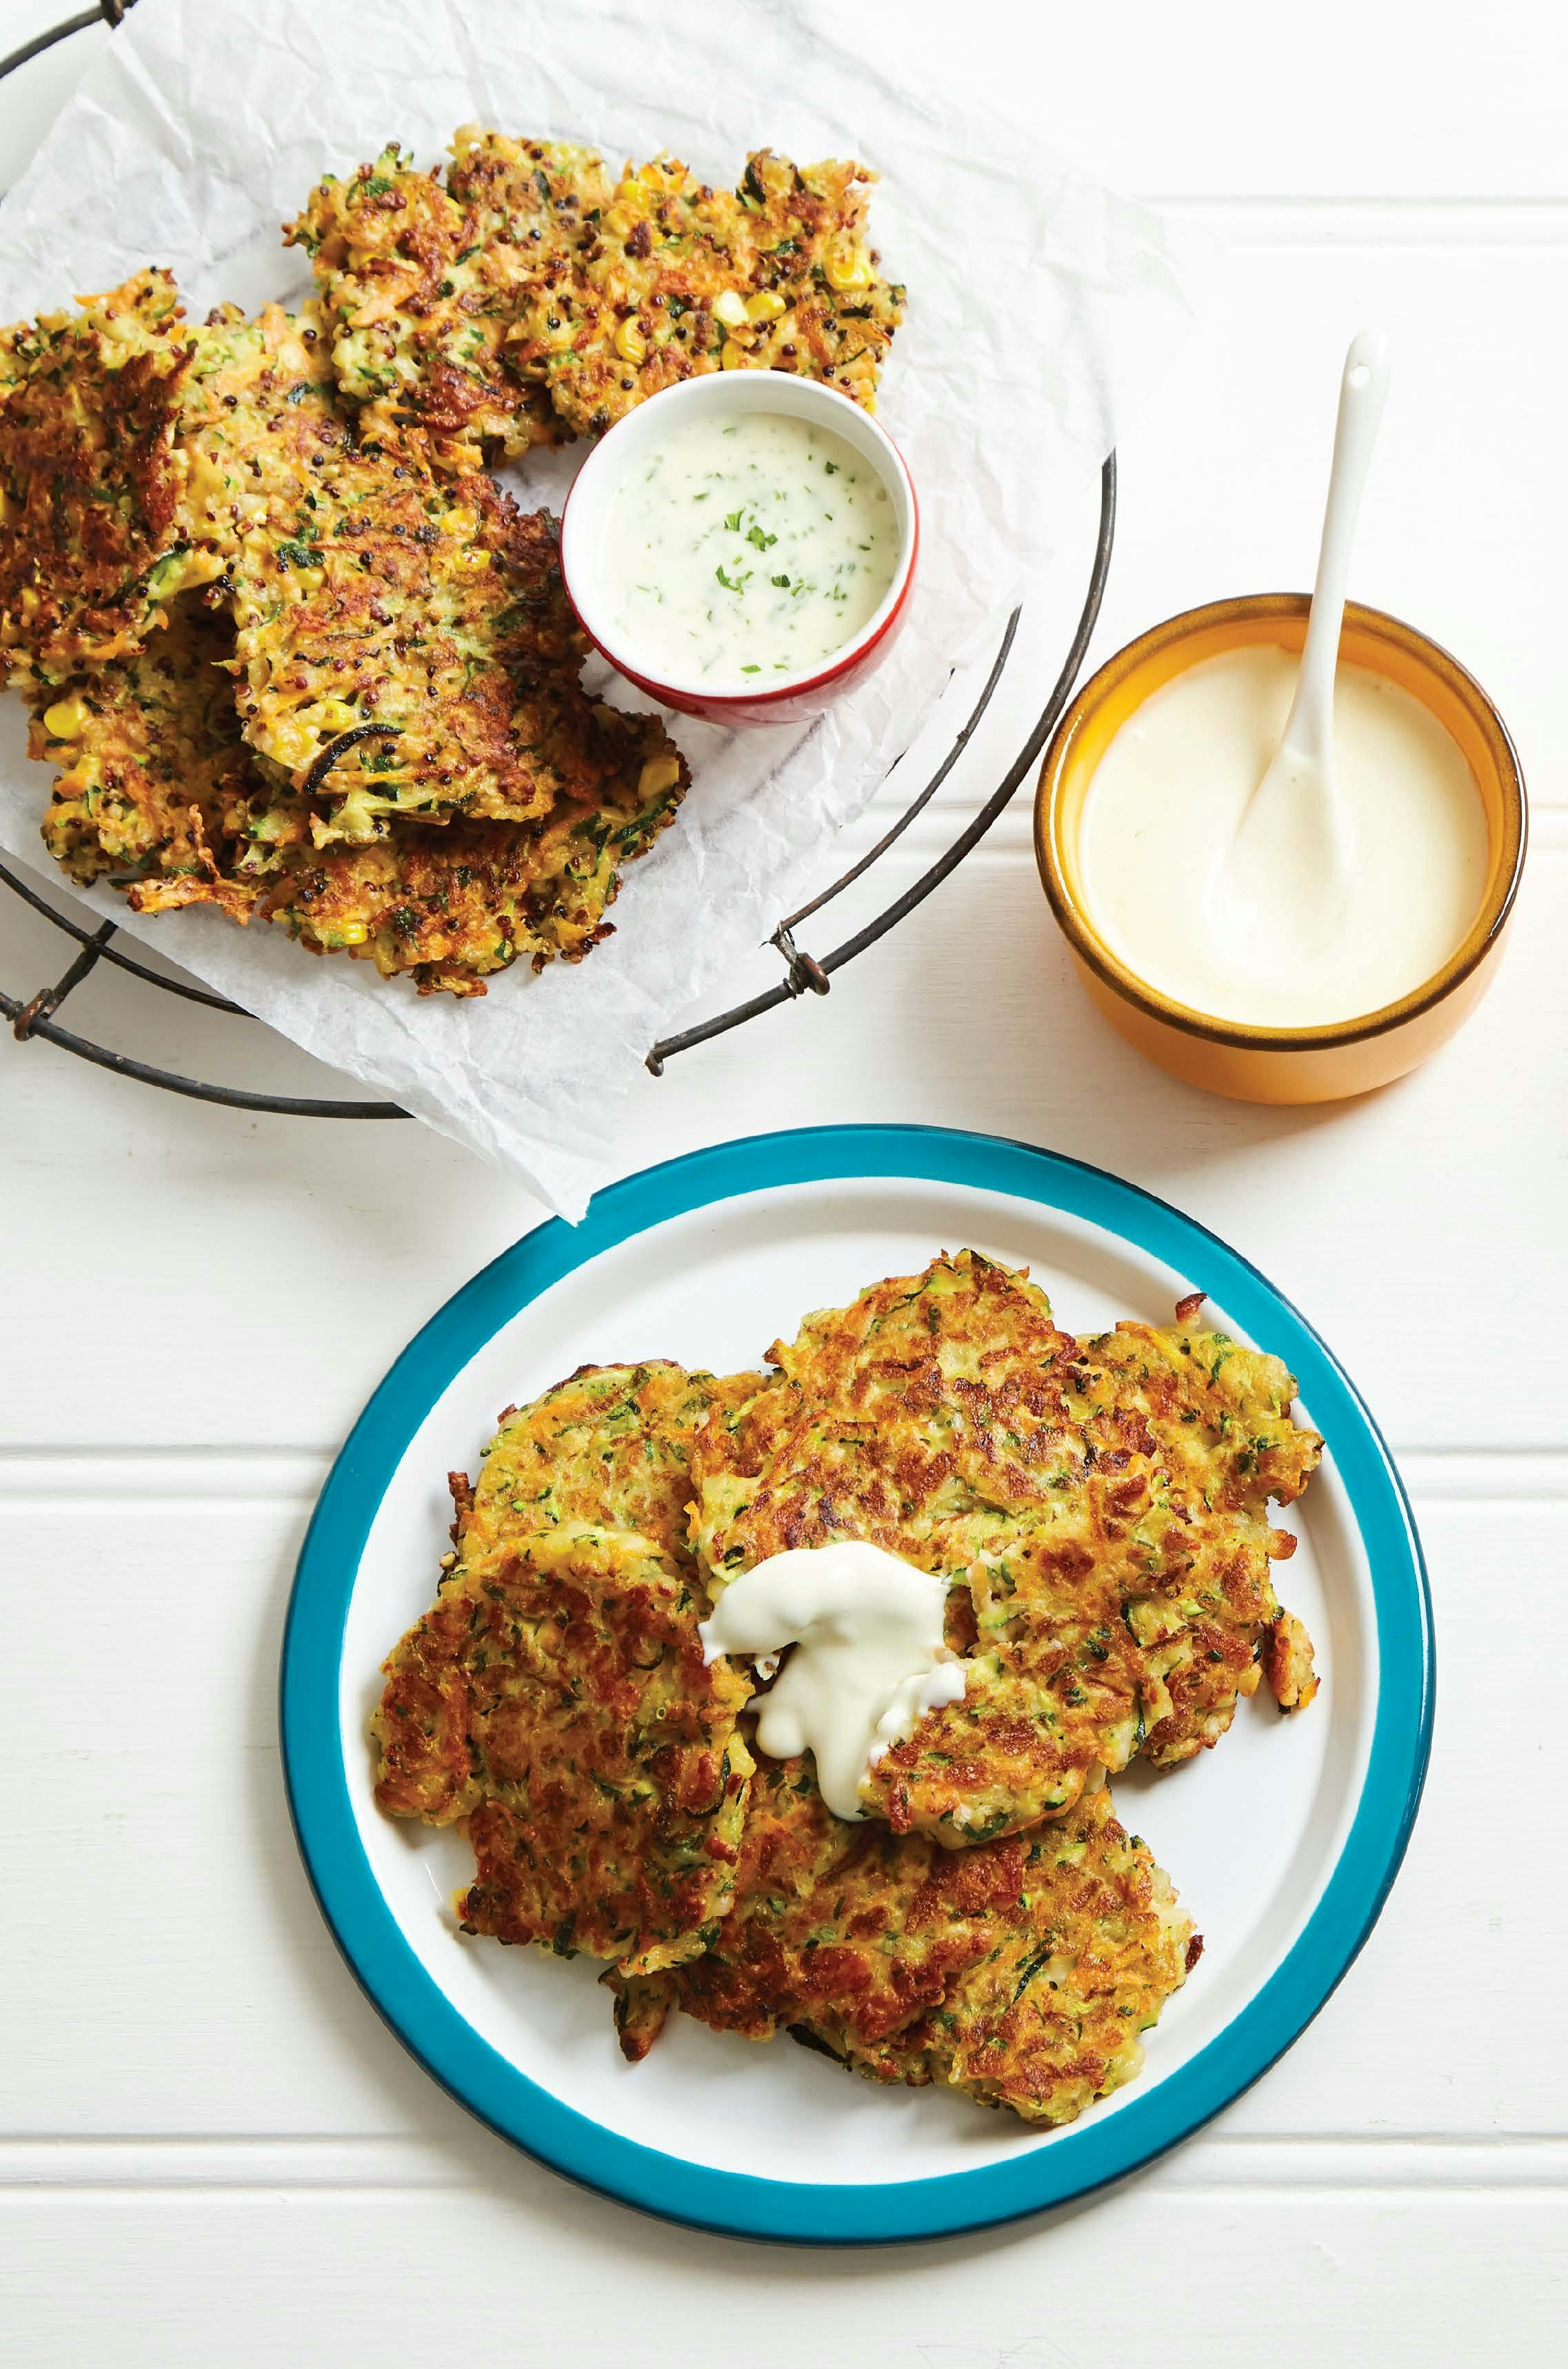 Vegetable and haloumi fritters